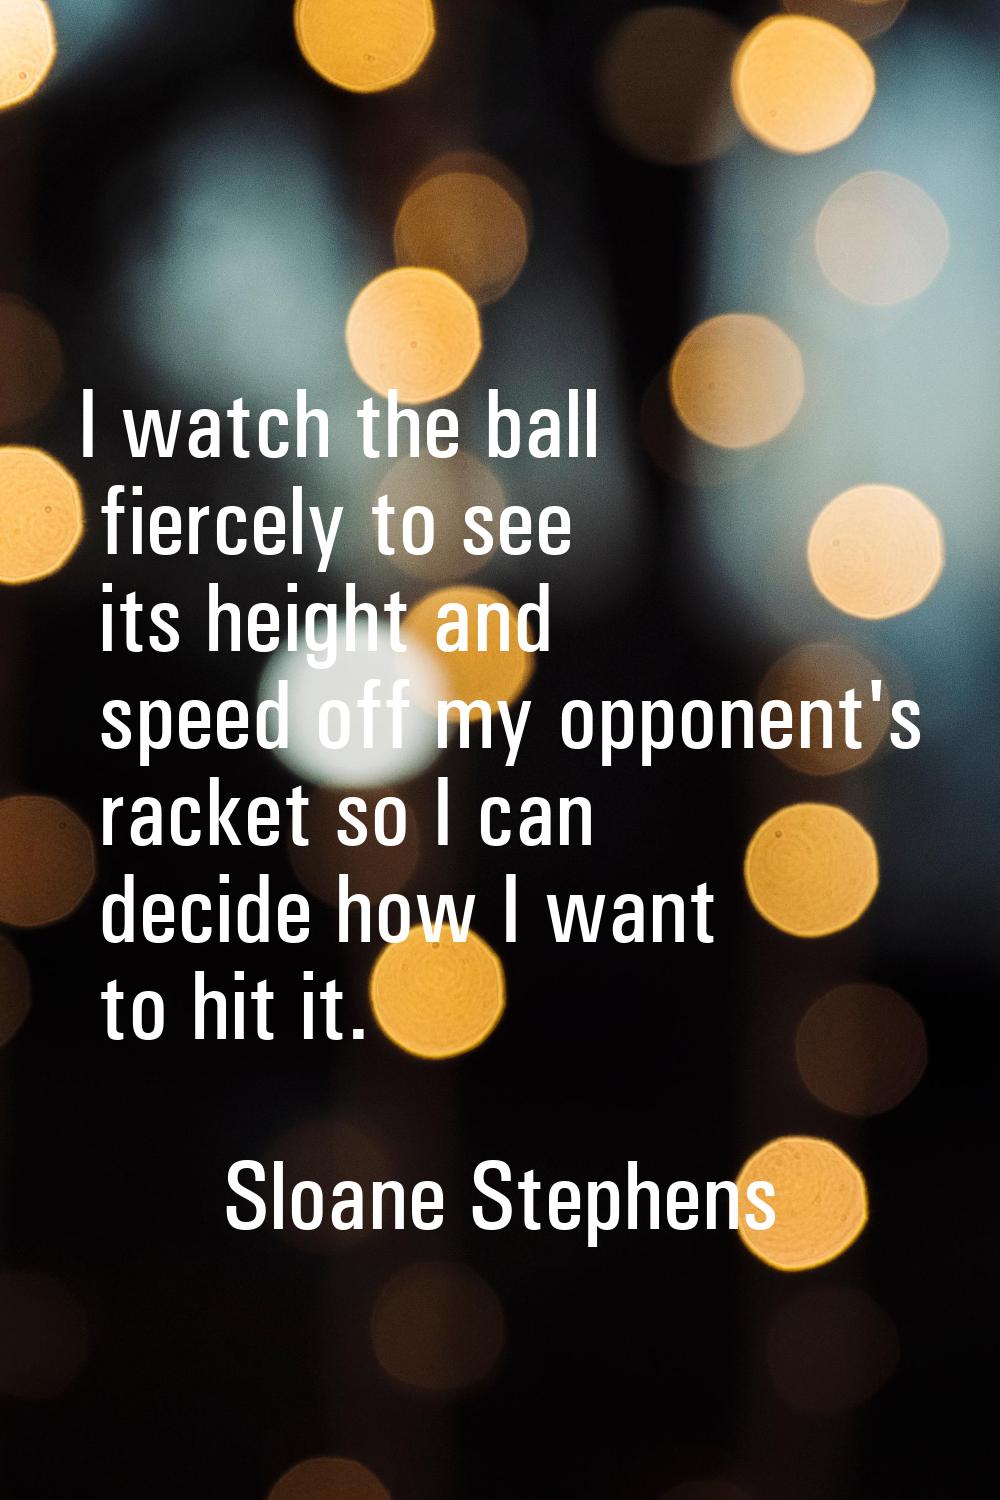 I watch the ball fiercely to see its height and speed off my opponent's racket so I can decide how 